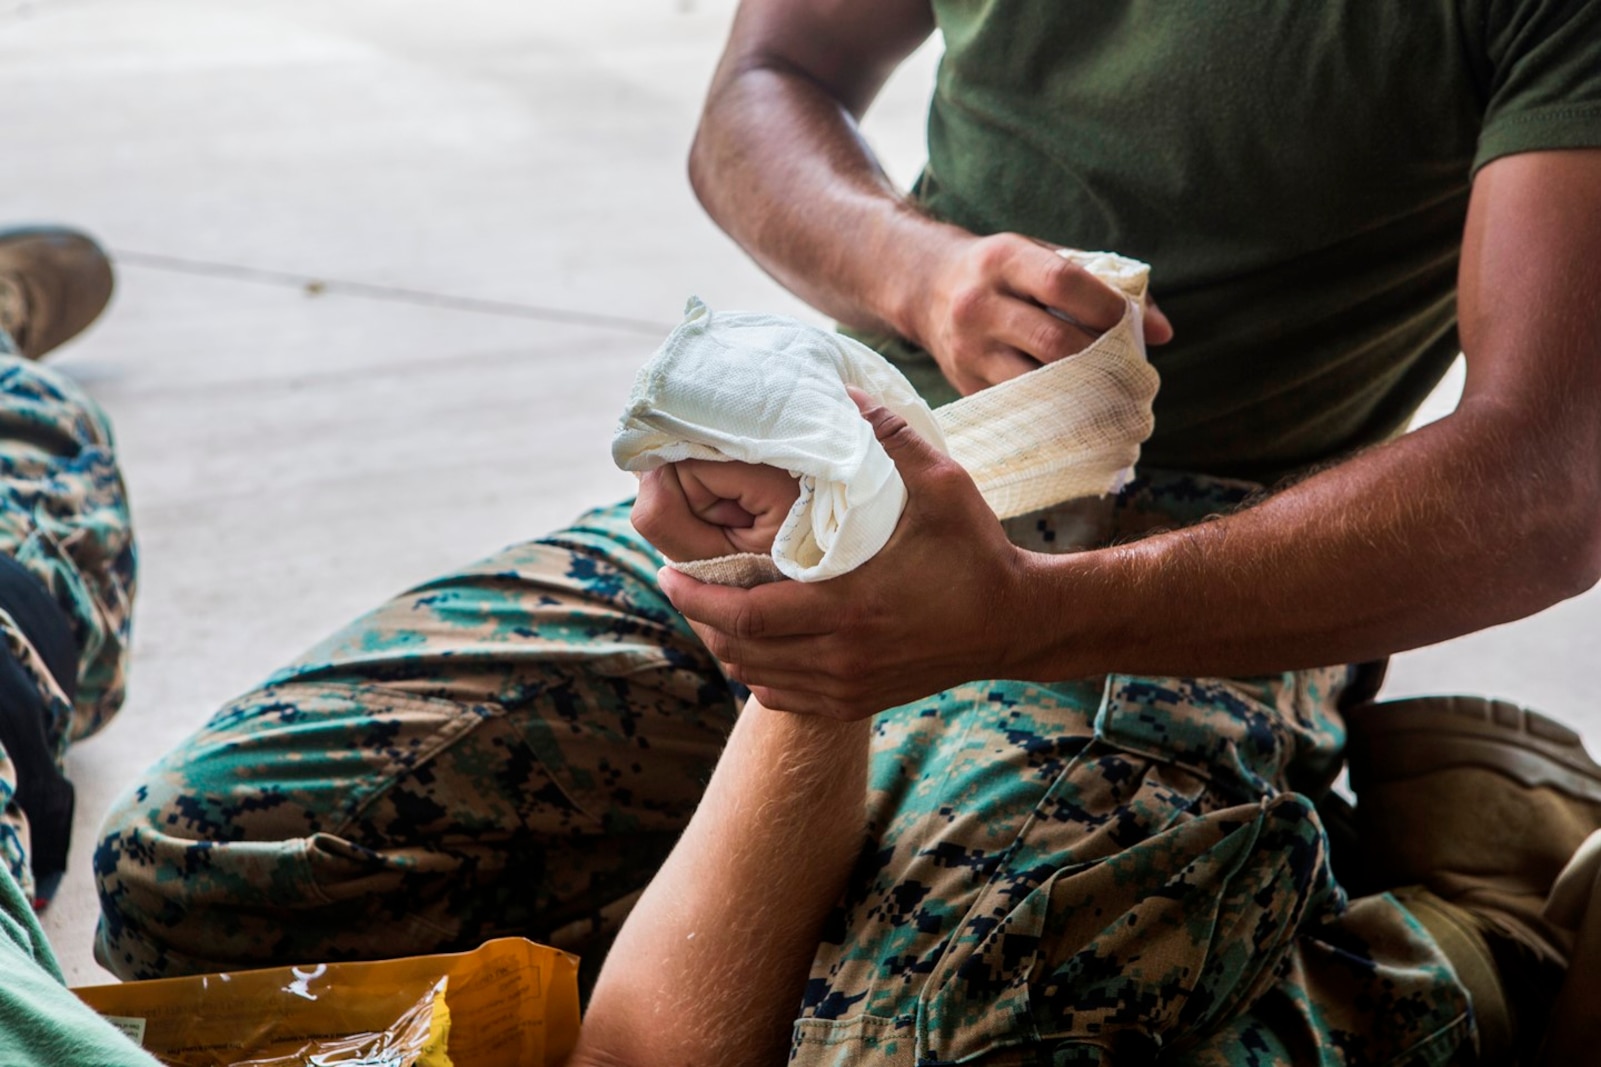 CAMP PENDLETON, Calif. – U.S. Marine Lance Cpl. Laine Fife, a marksmanship coach with the Marksmanship Training Unit, Headquarters Company, Headquarters Regiment, 1st Marine Logistics Group, uses gauze to wrap up a wounded hand during the practical application portion of a combat lifesaver course July 22, 2017. Through the CLS course, Marines add combat casualty care to their arsenal of individual capabilities. (U.S. Marine Corps Photo by Lance Cpl. Joseph Sorci)